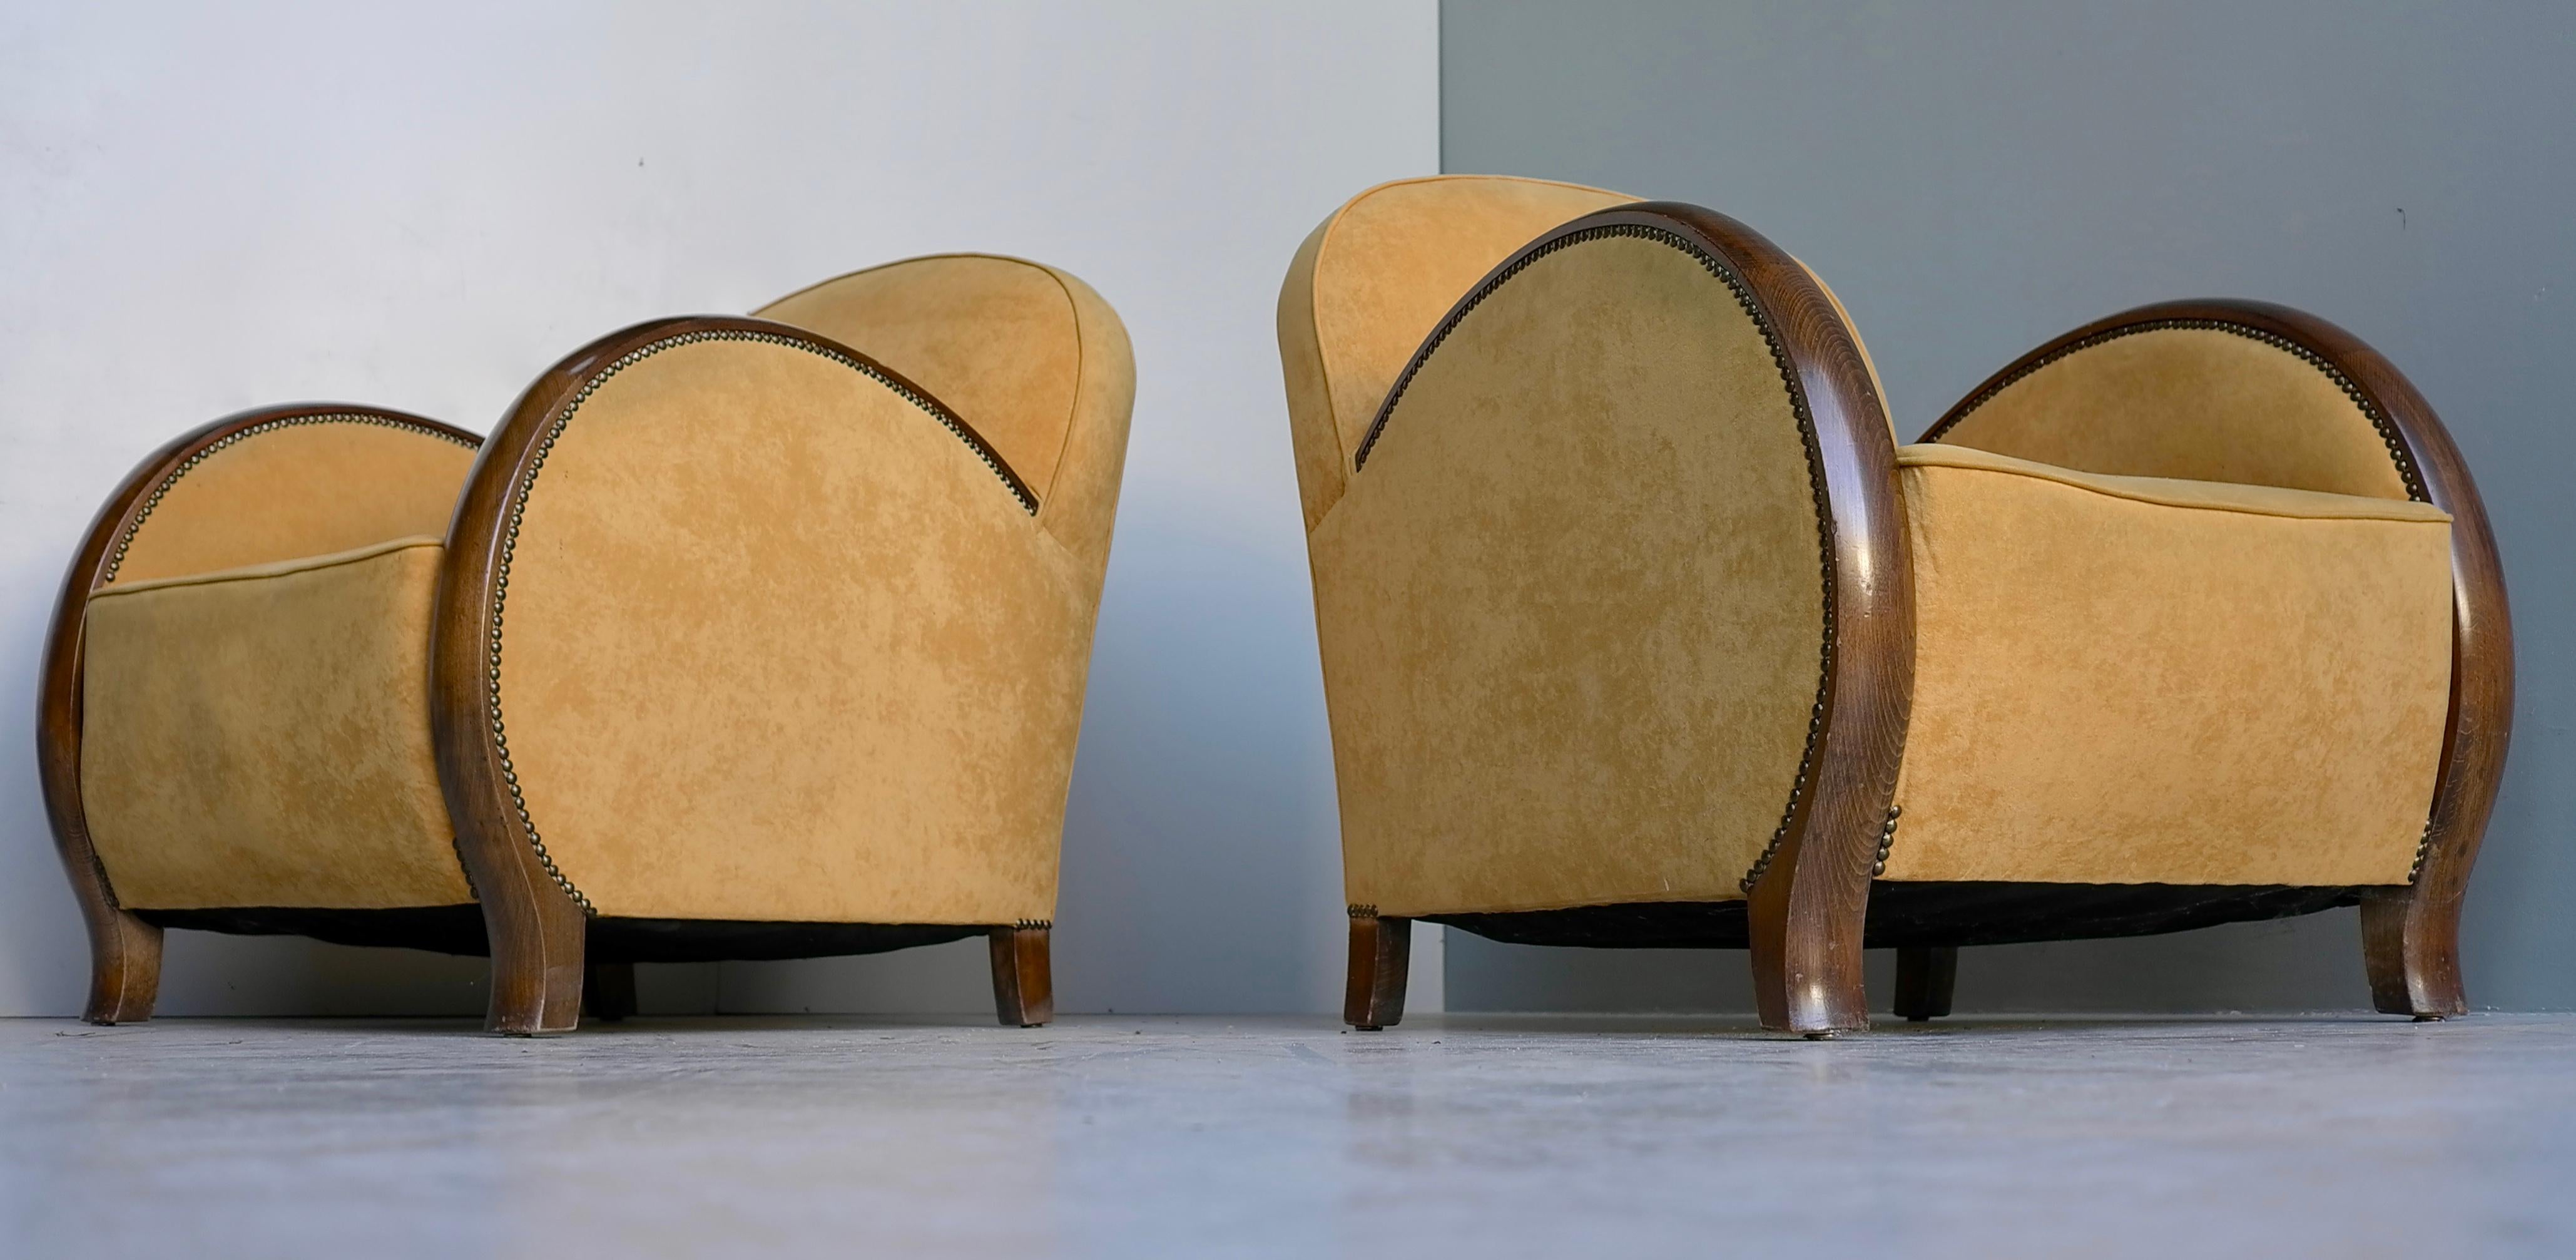 Pair of Art Deco Streamlined Armchairs in yellow Velvet with Wooden arms 1930's For Sale 7